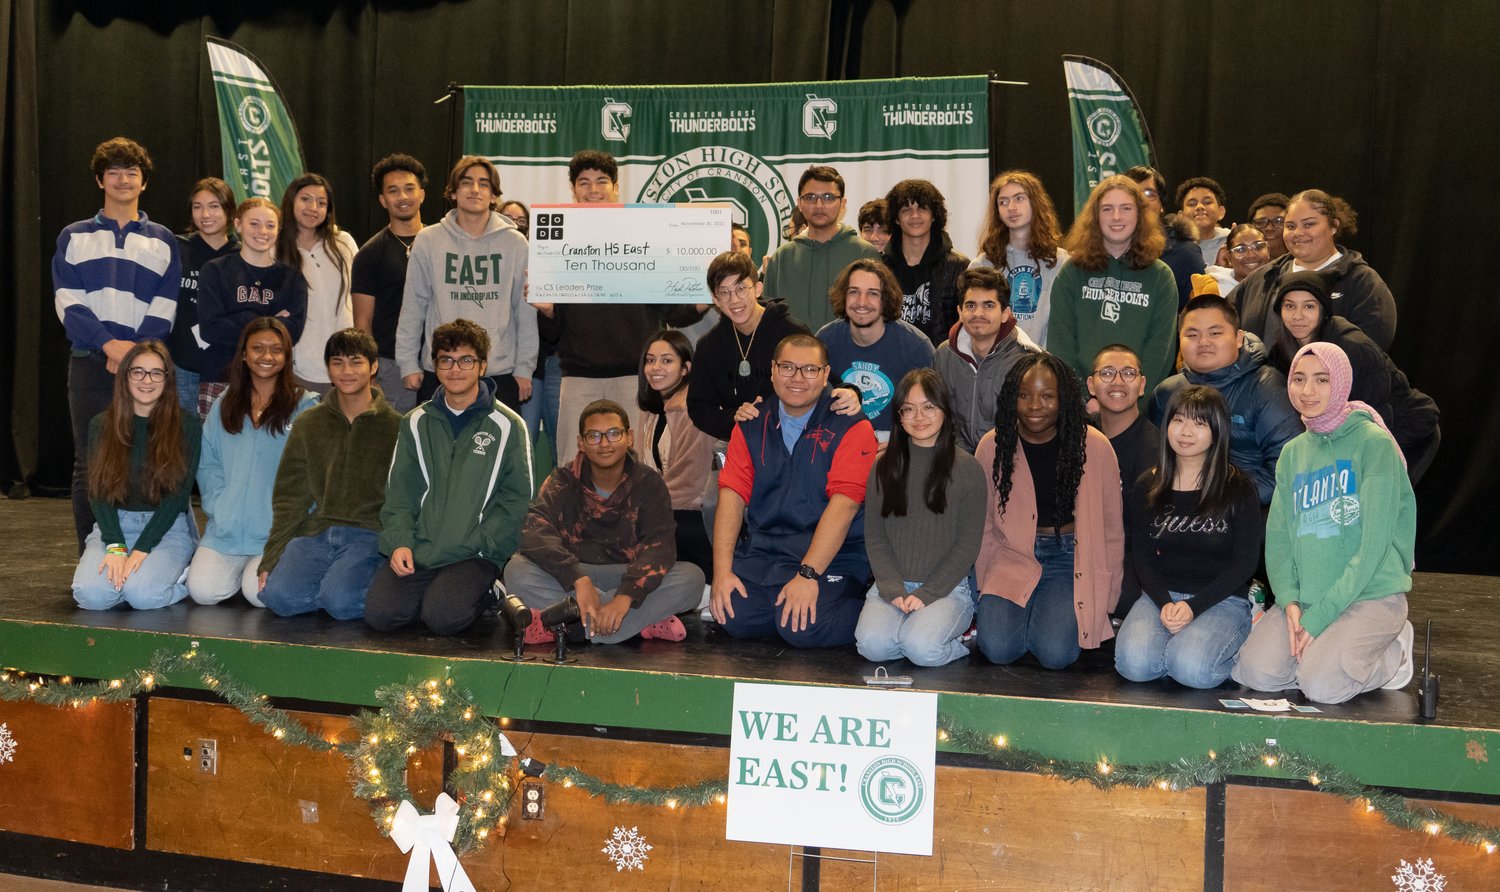 FURTHERING COMPUTER SCIENCE EDUCATION: Cranston High School East CTE students pose with a check presented to the school by Code.org on Dec. 14 to help further computer science education for underrepresented students. Rising Cranston East ninth graders will have the opportunity to enroll in Computer Science at Cranston East starting in the fall.